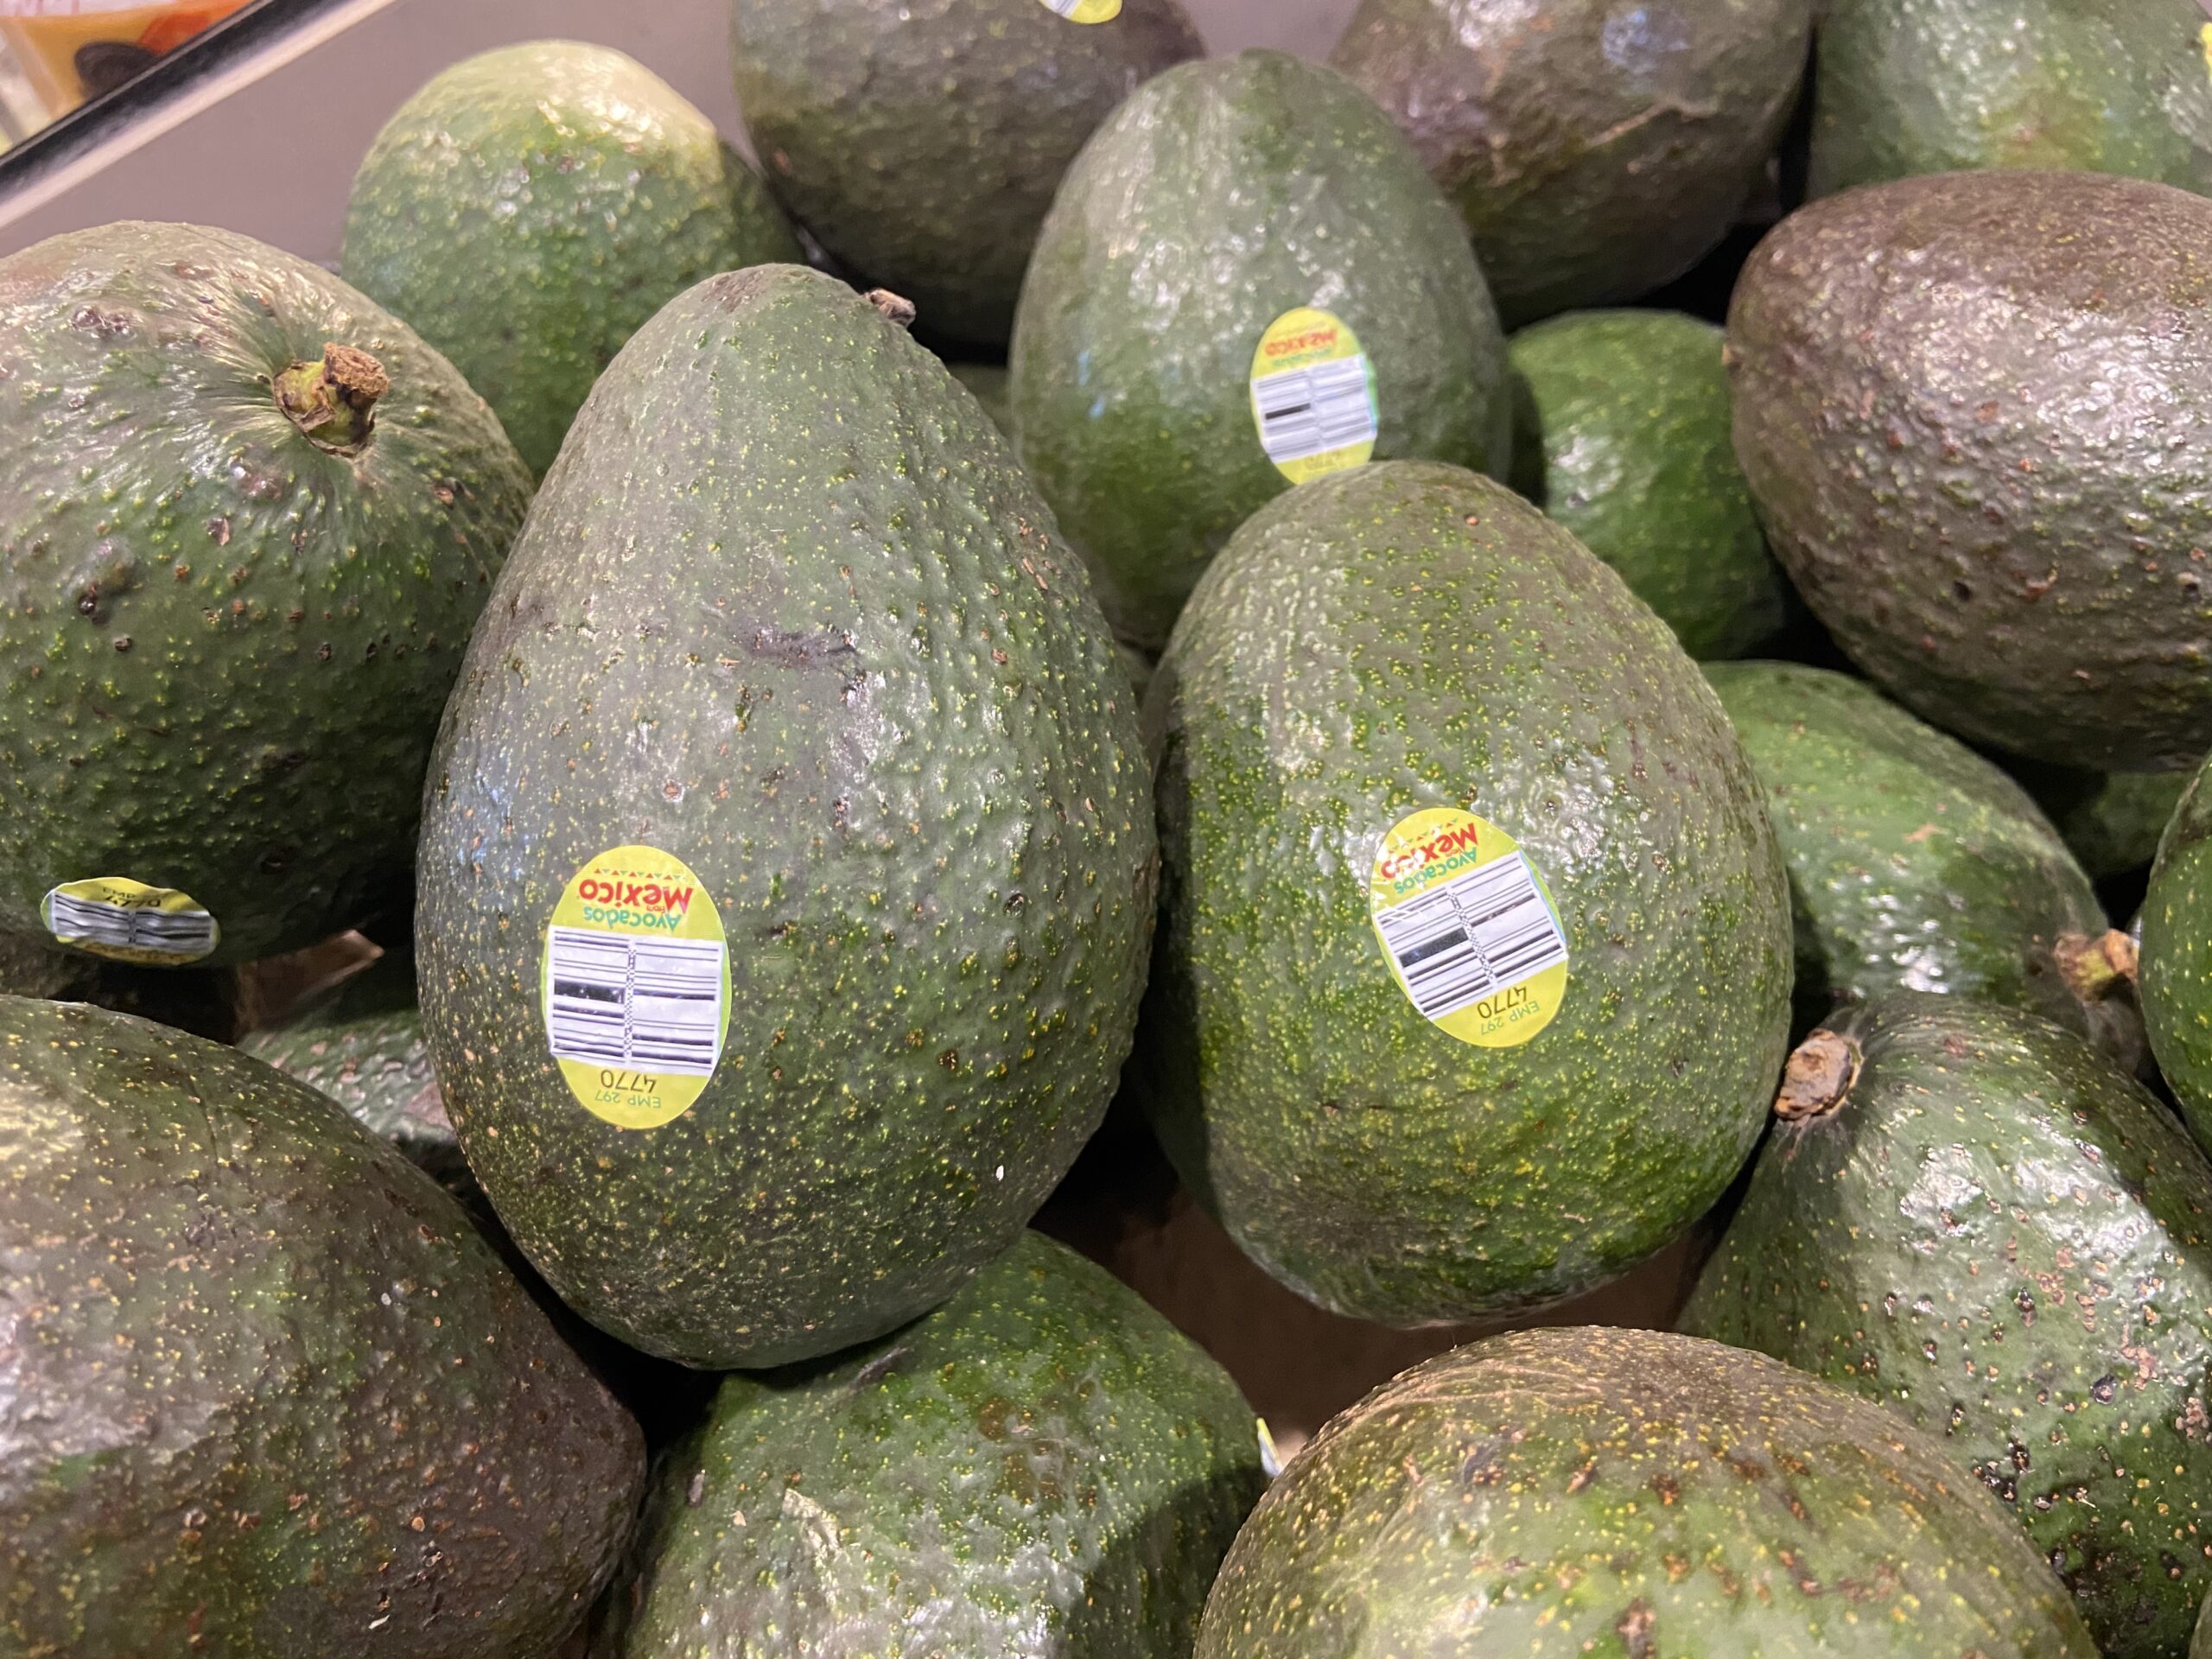 Giant Deal on Hass Avocados